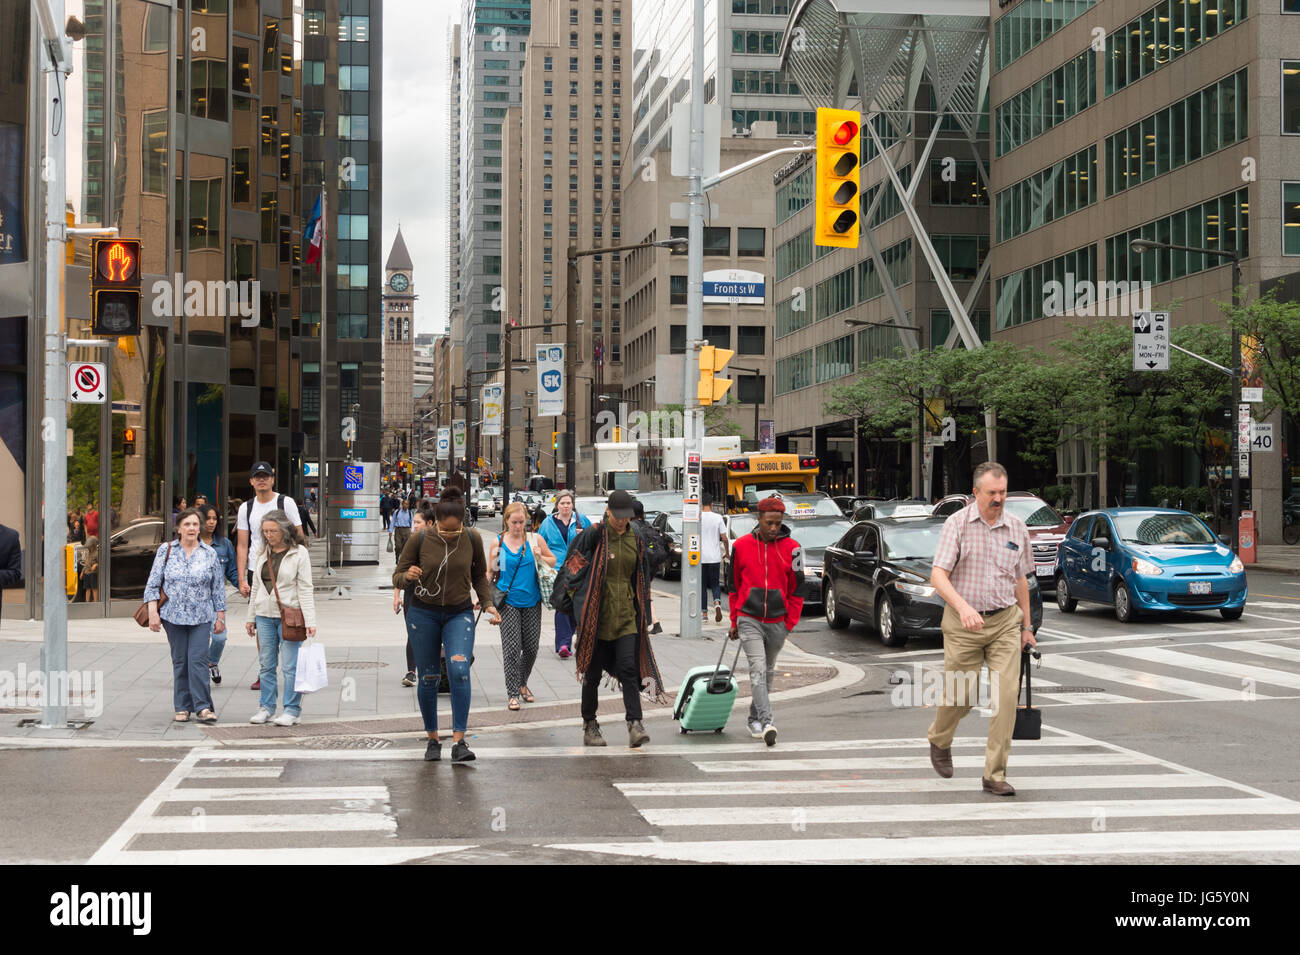 Toronto, Canada - 26 June 2017: A crowd of people crossing Front street in Downtown Toronto Stock Photo